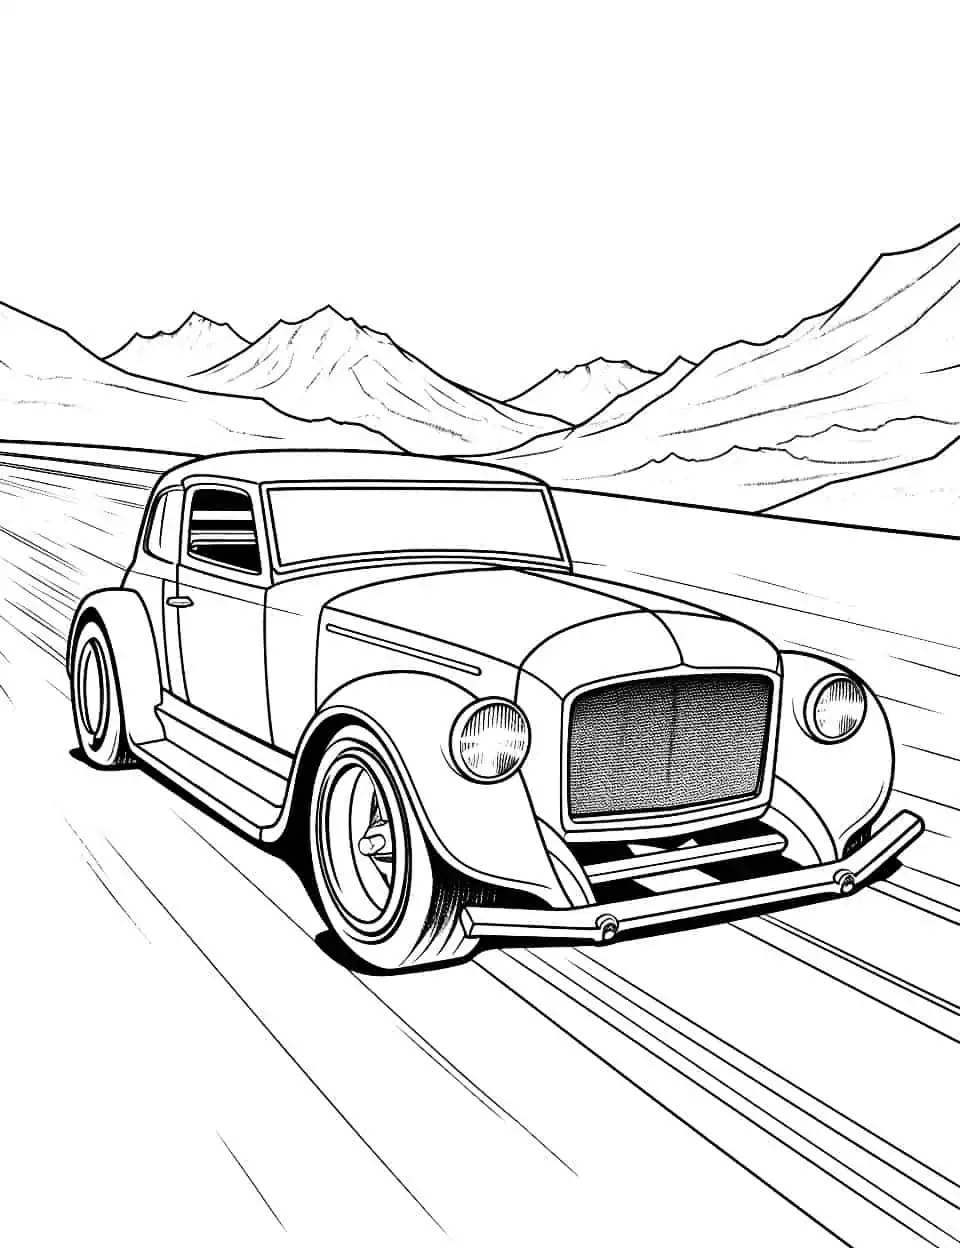 Hot Rod on a Roll Car Coloring Page - A classic hot rod car on a roll on the highway.